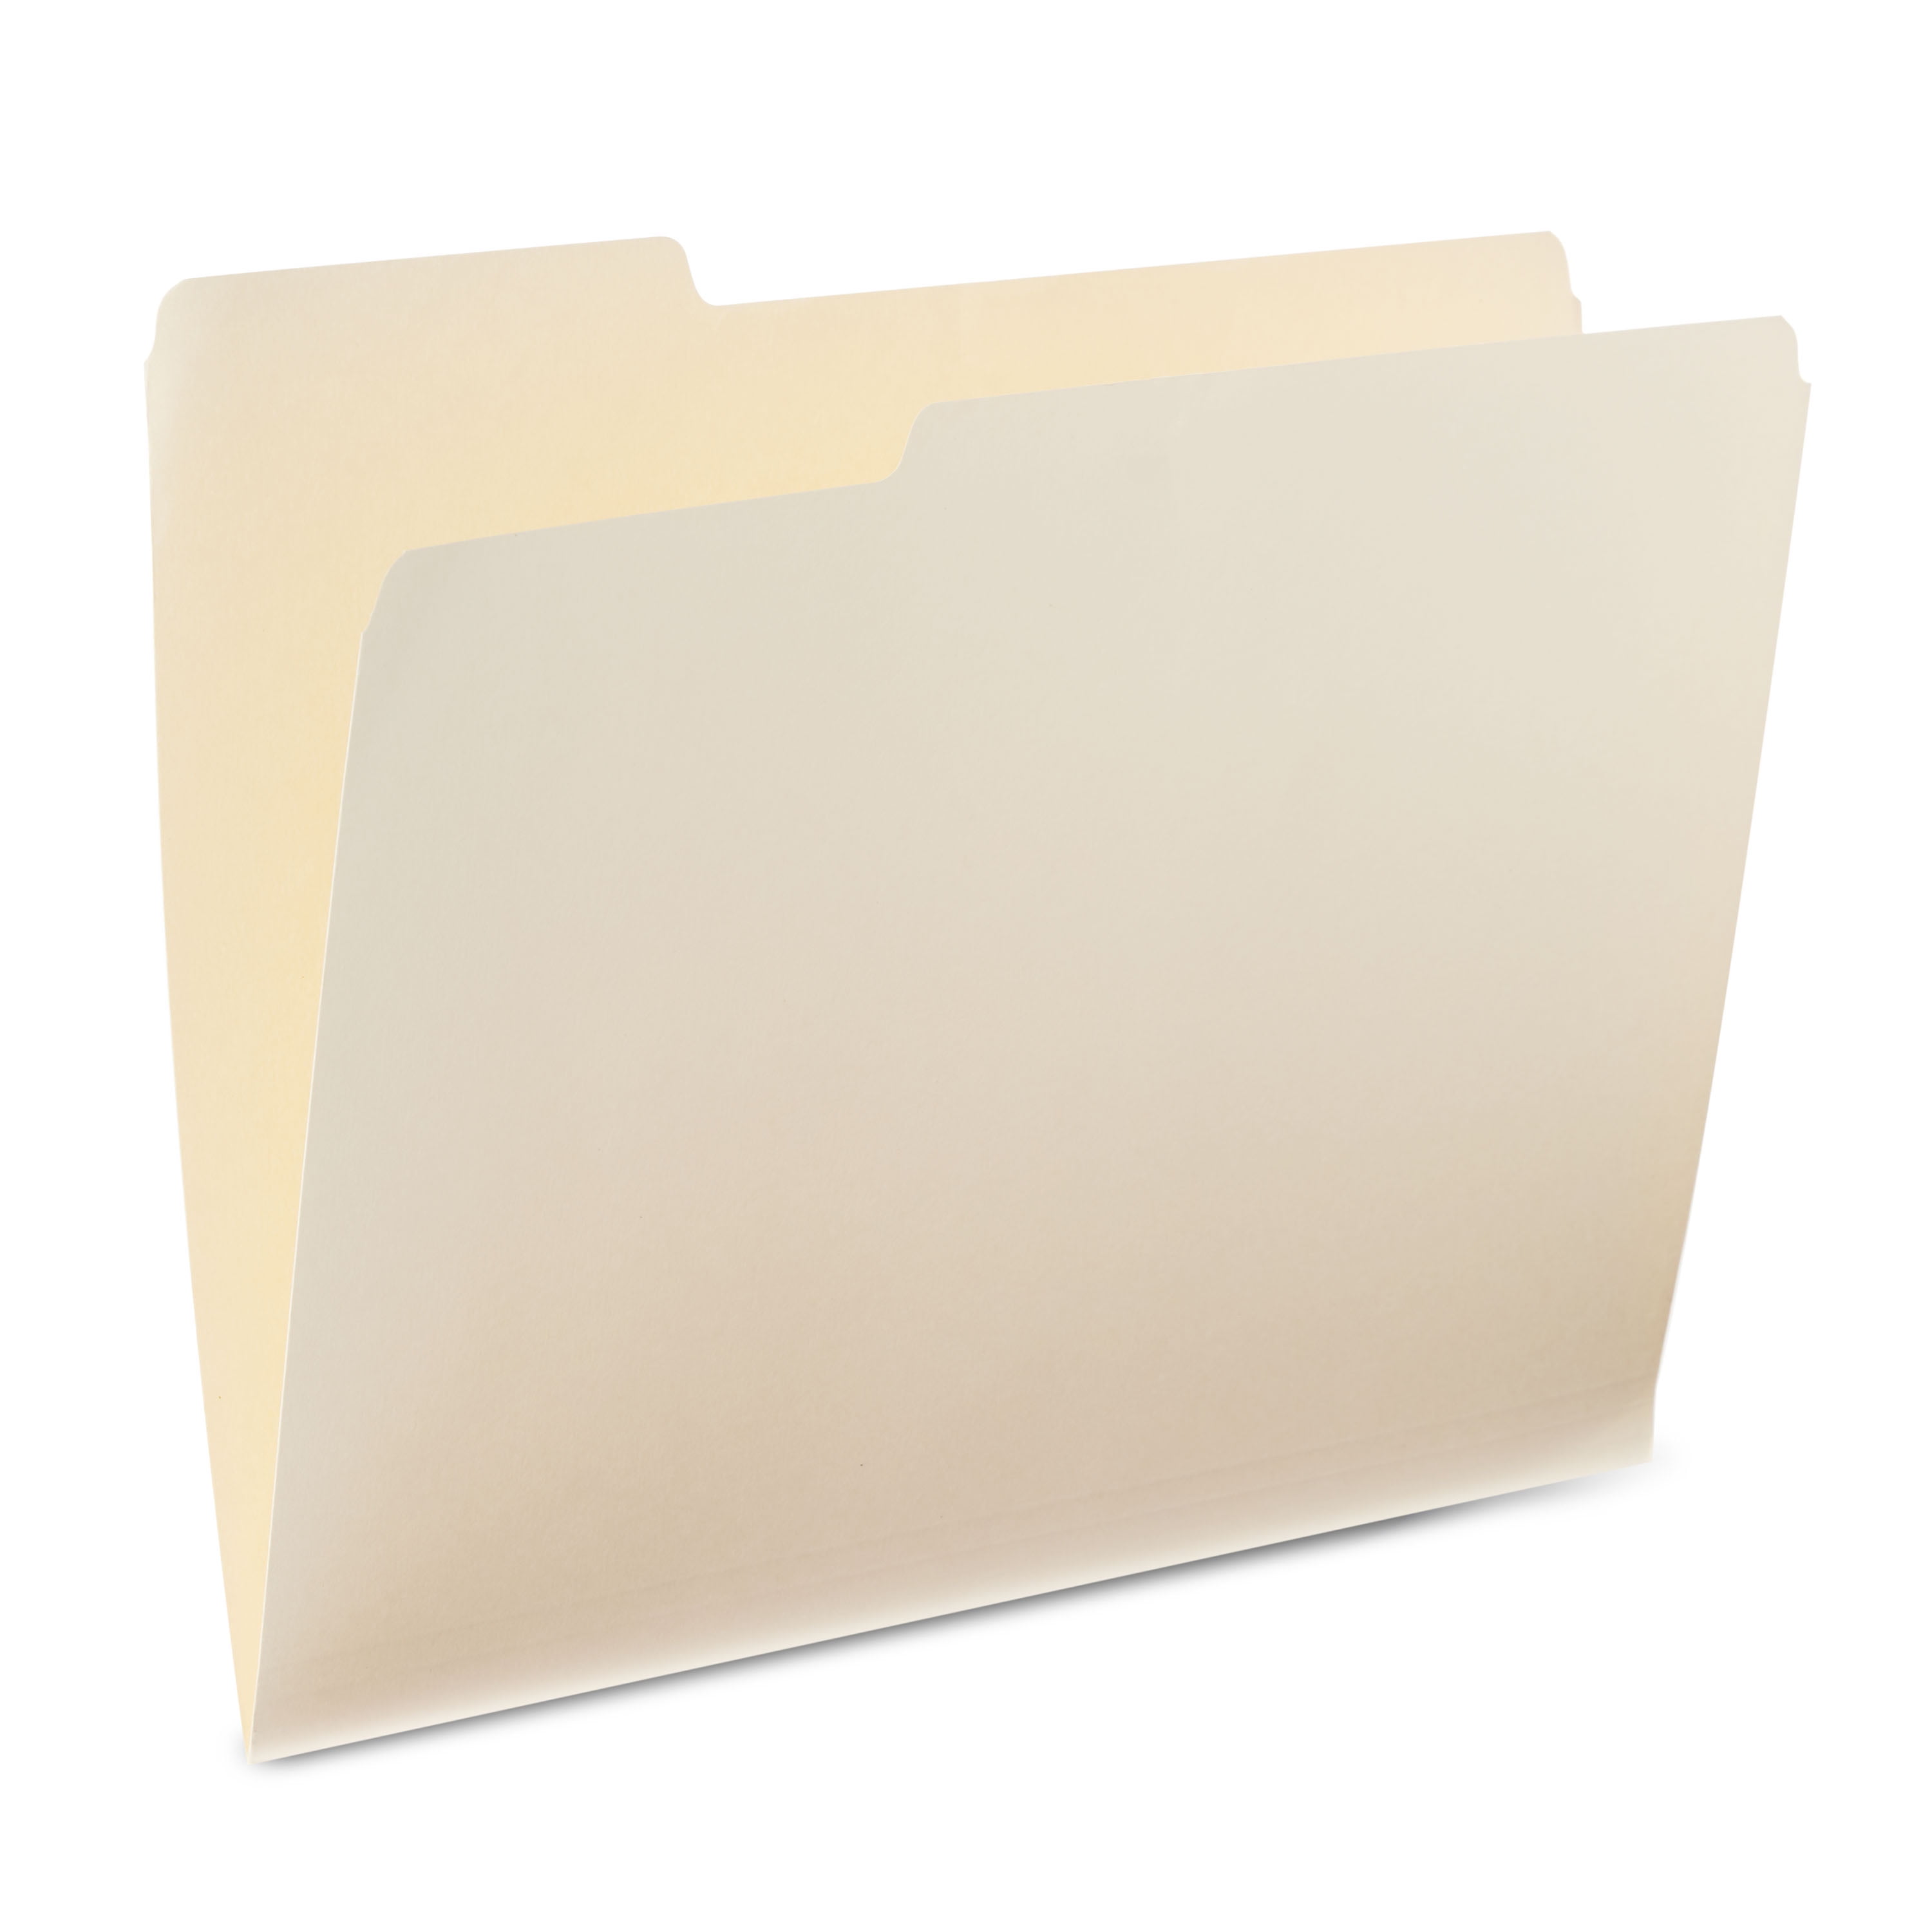 Manila File Folders, Letter Size, 3 Tab Positions, 12 Count